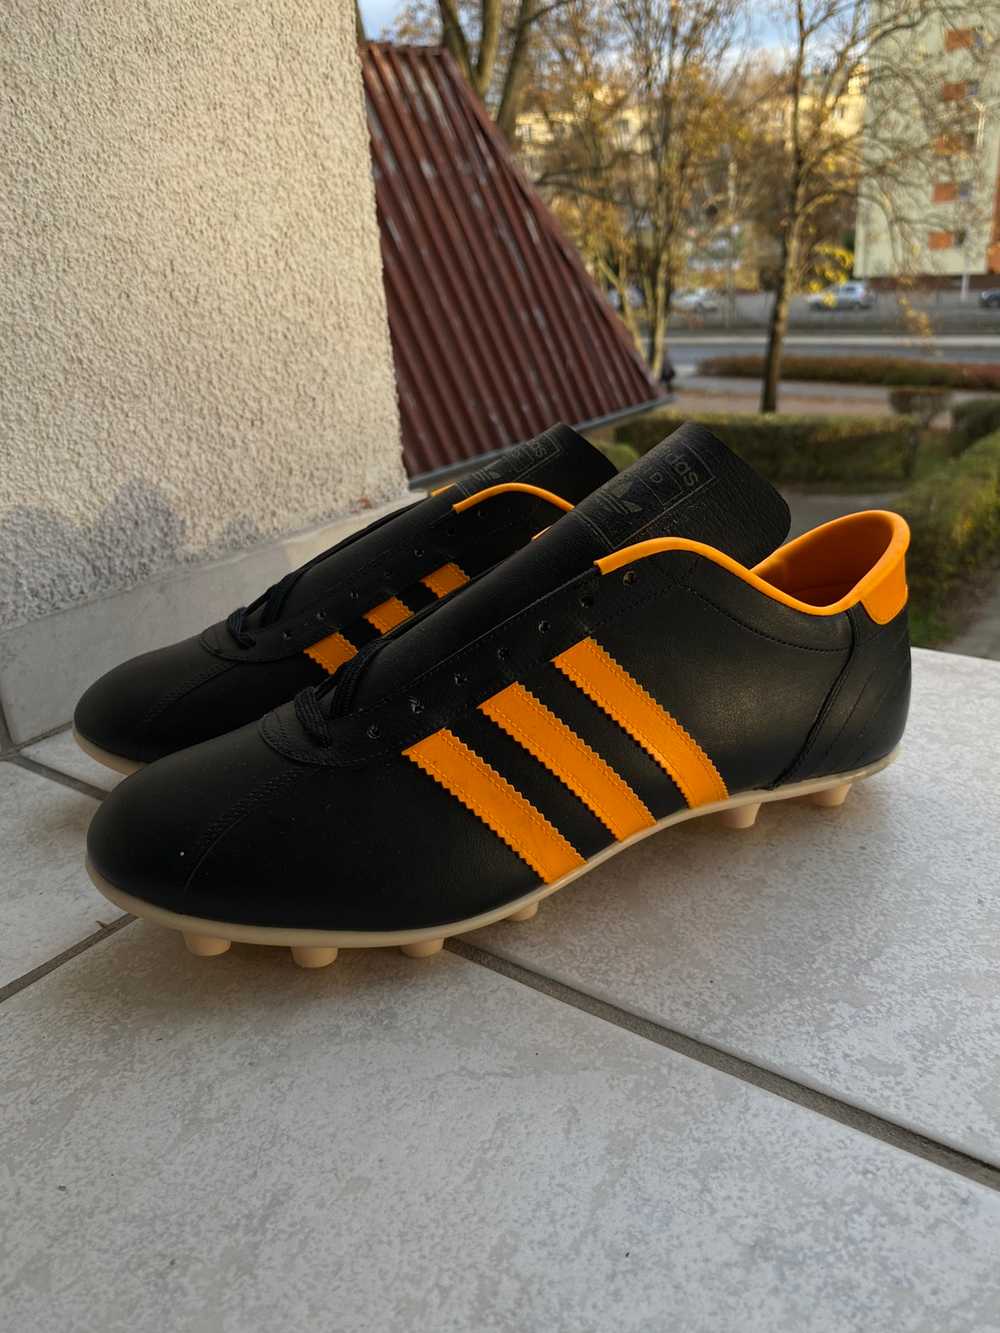 Adidas Kid made in France 70-80s football boots - image 3